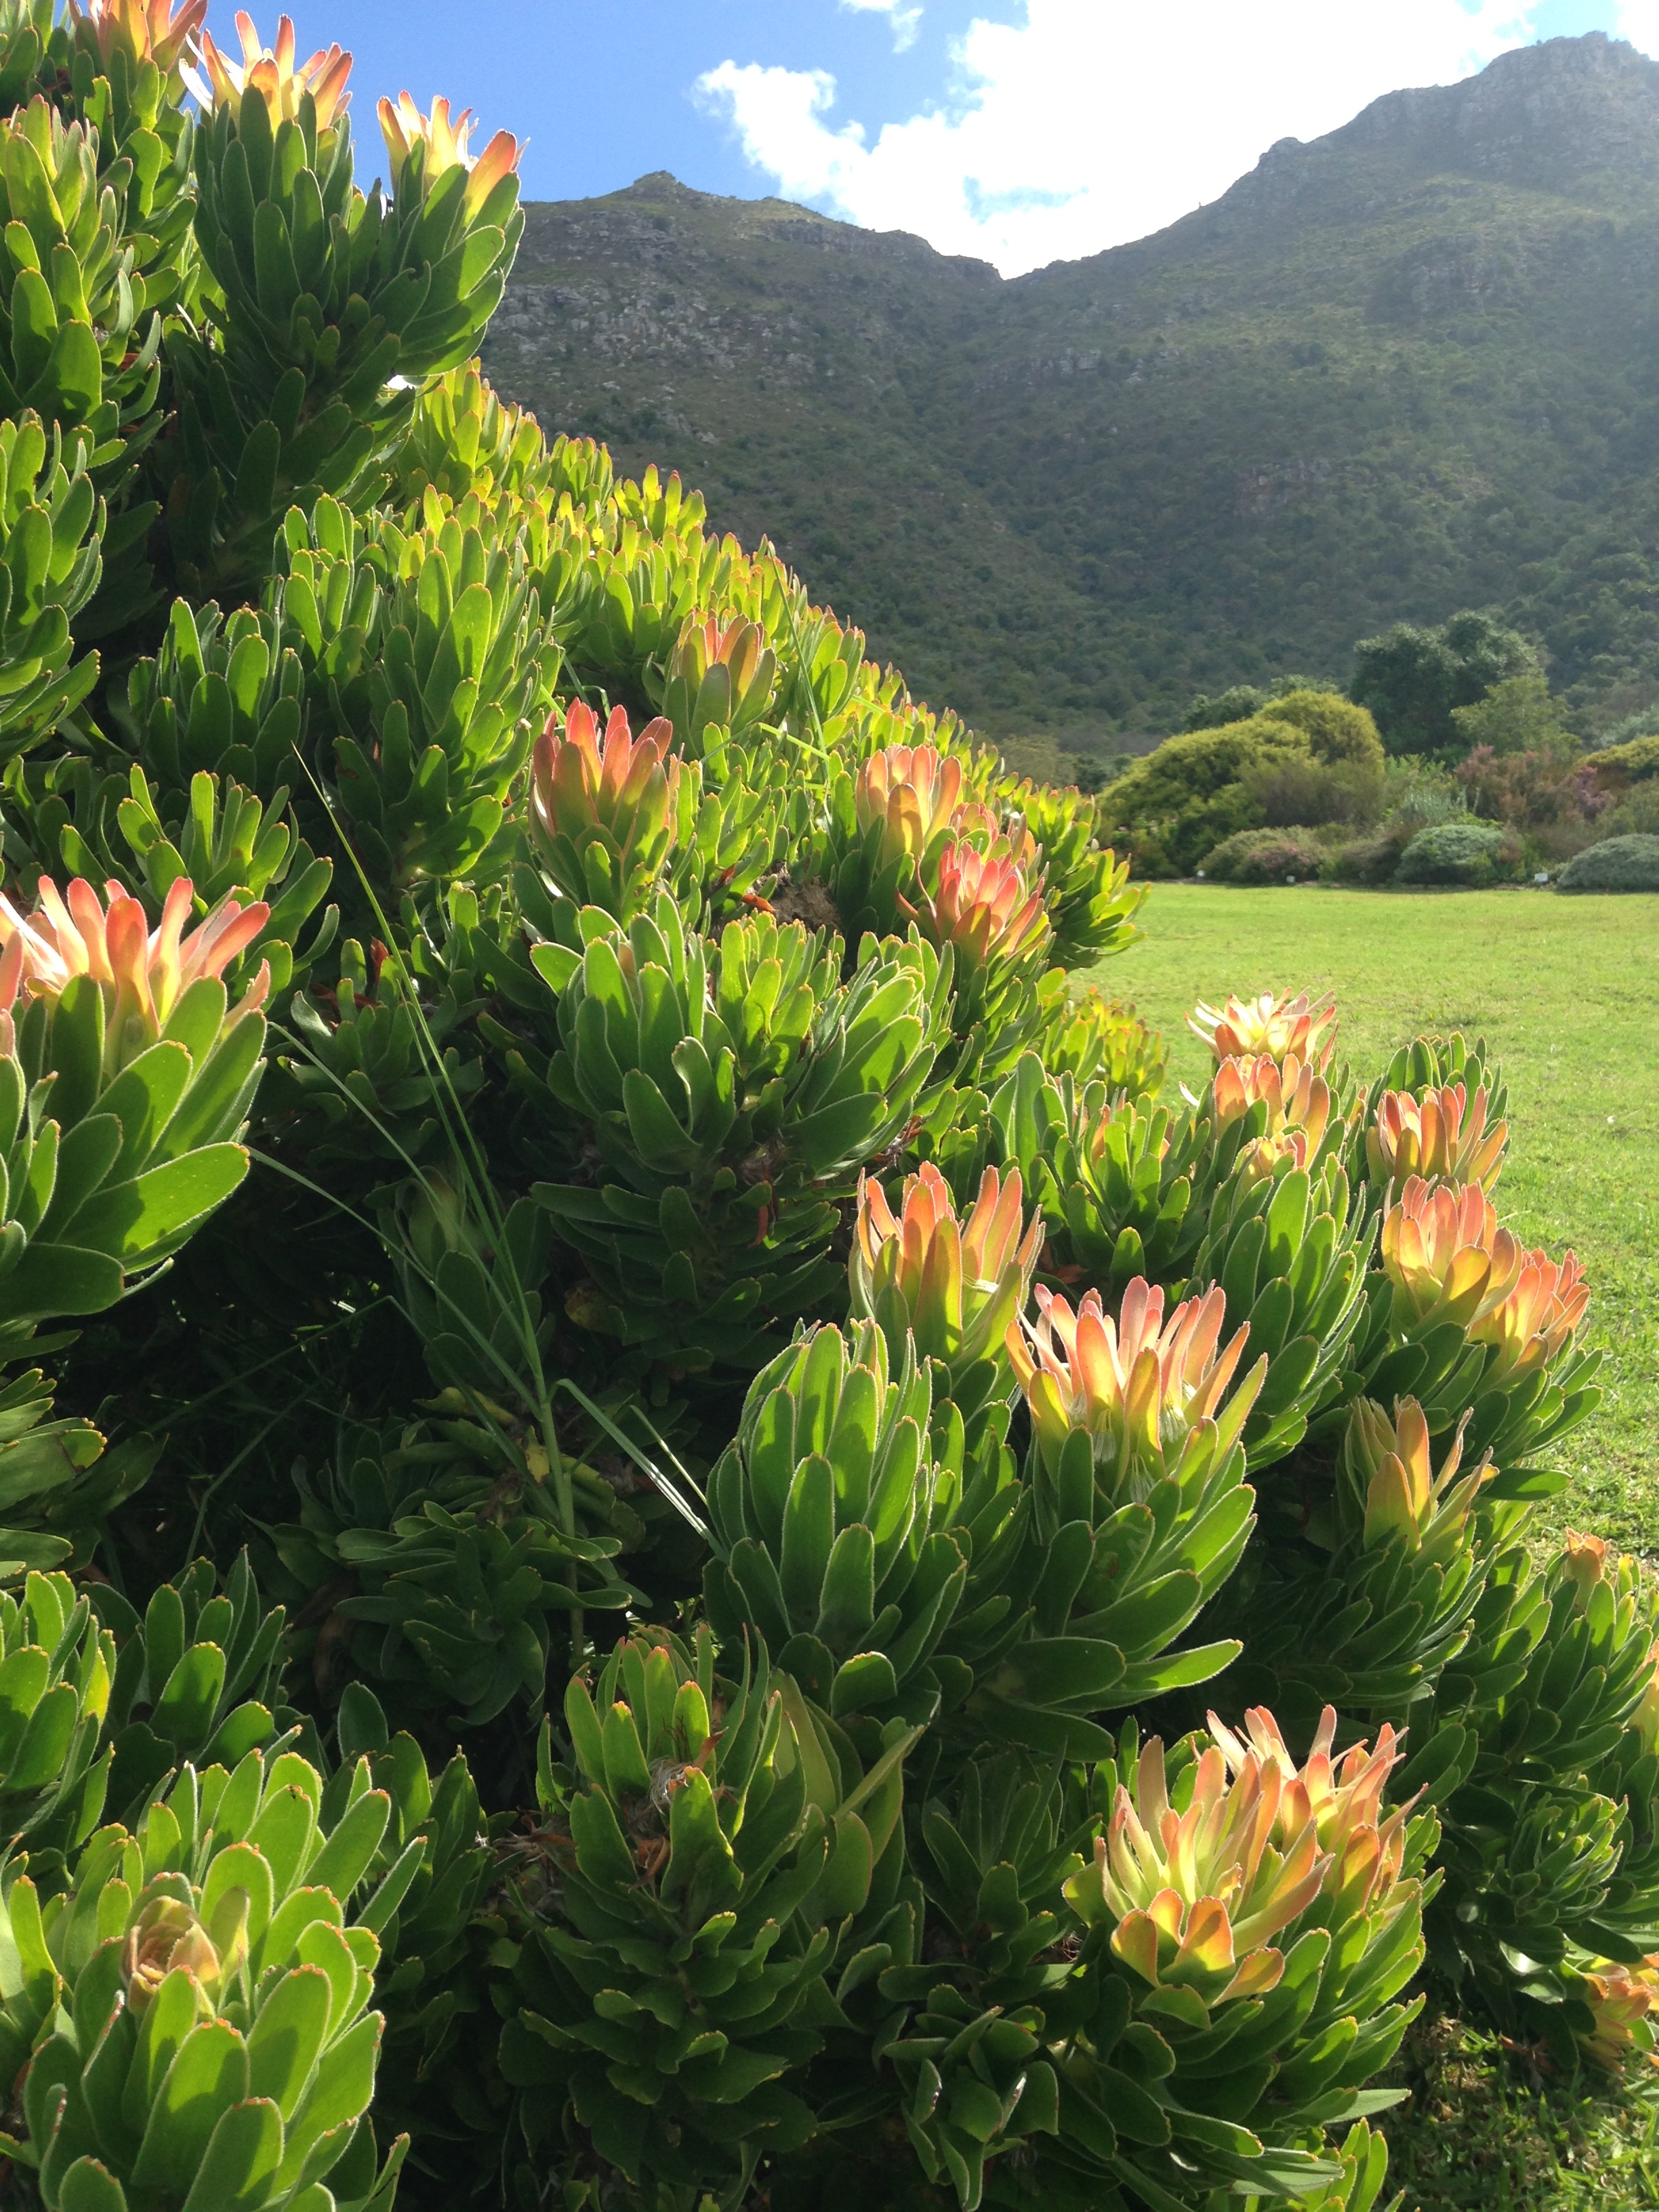 peach flowers bloom on a shrub with mountains in background